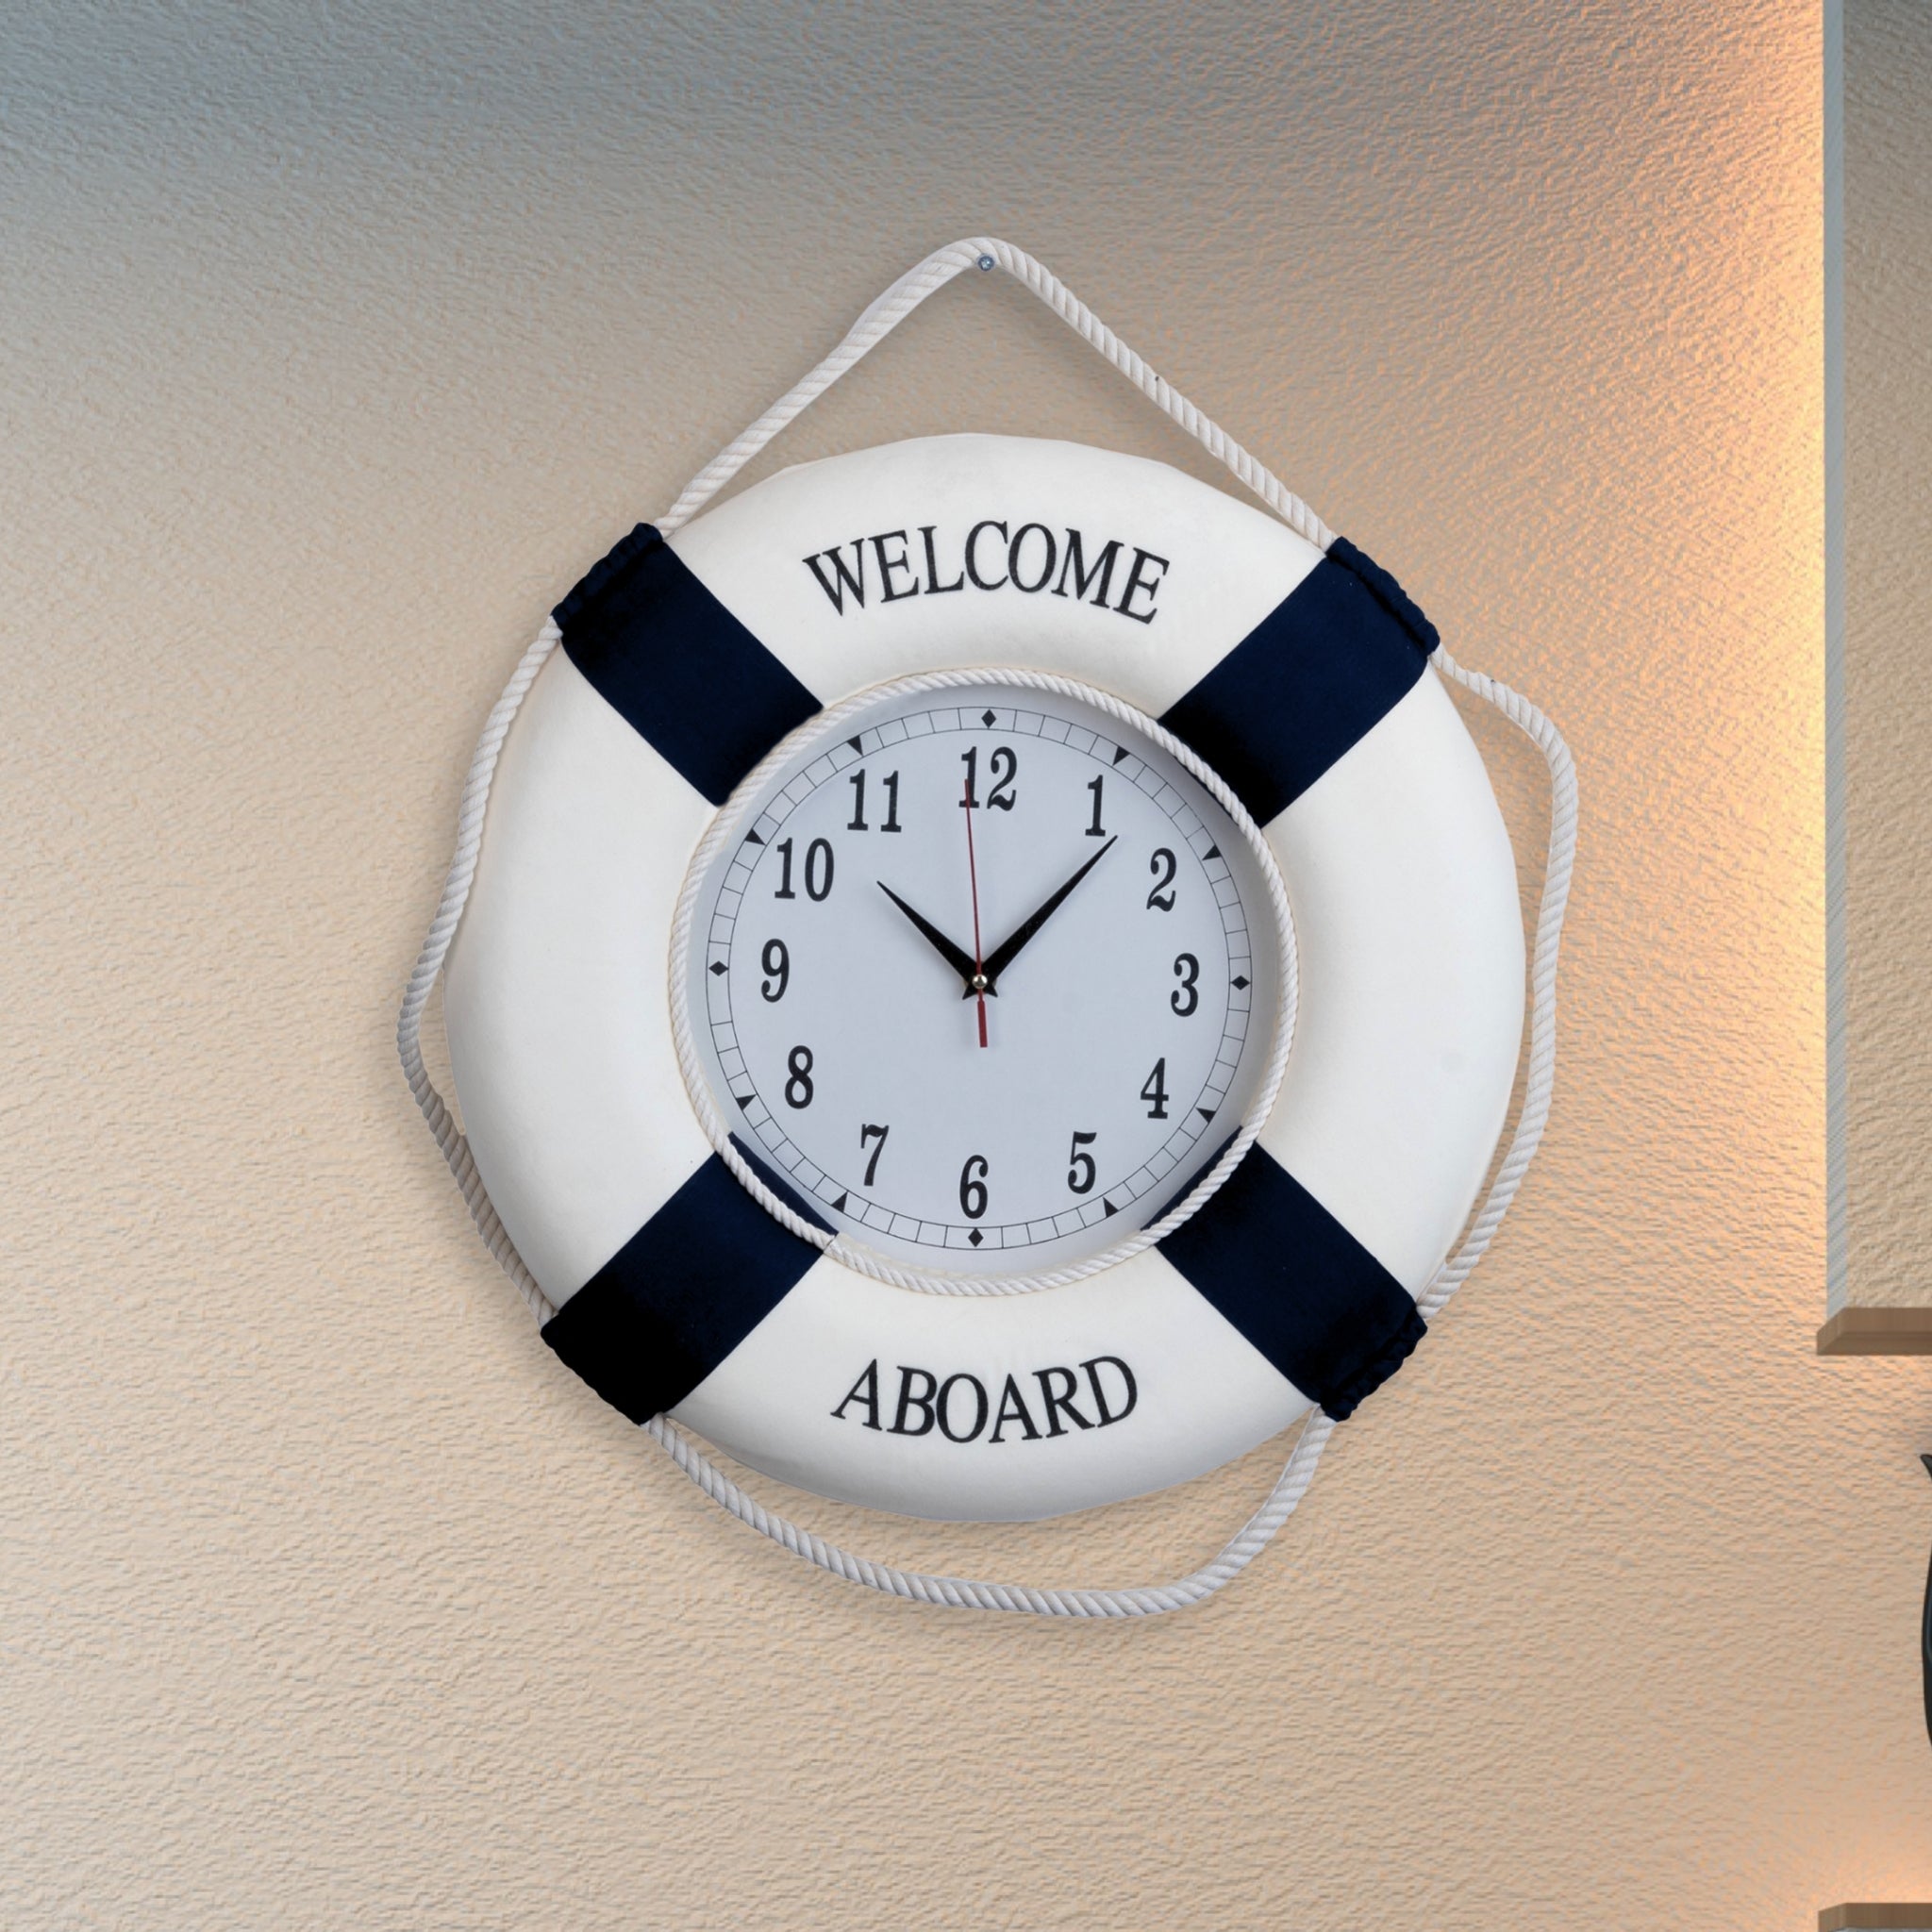 Welcome Aboard Nautical Life Lifebuoy Ring Boat Wall Hanging Home Decoration  Mediterranean Style - AliExpress